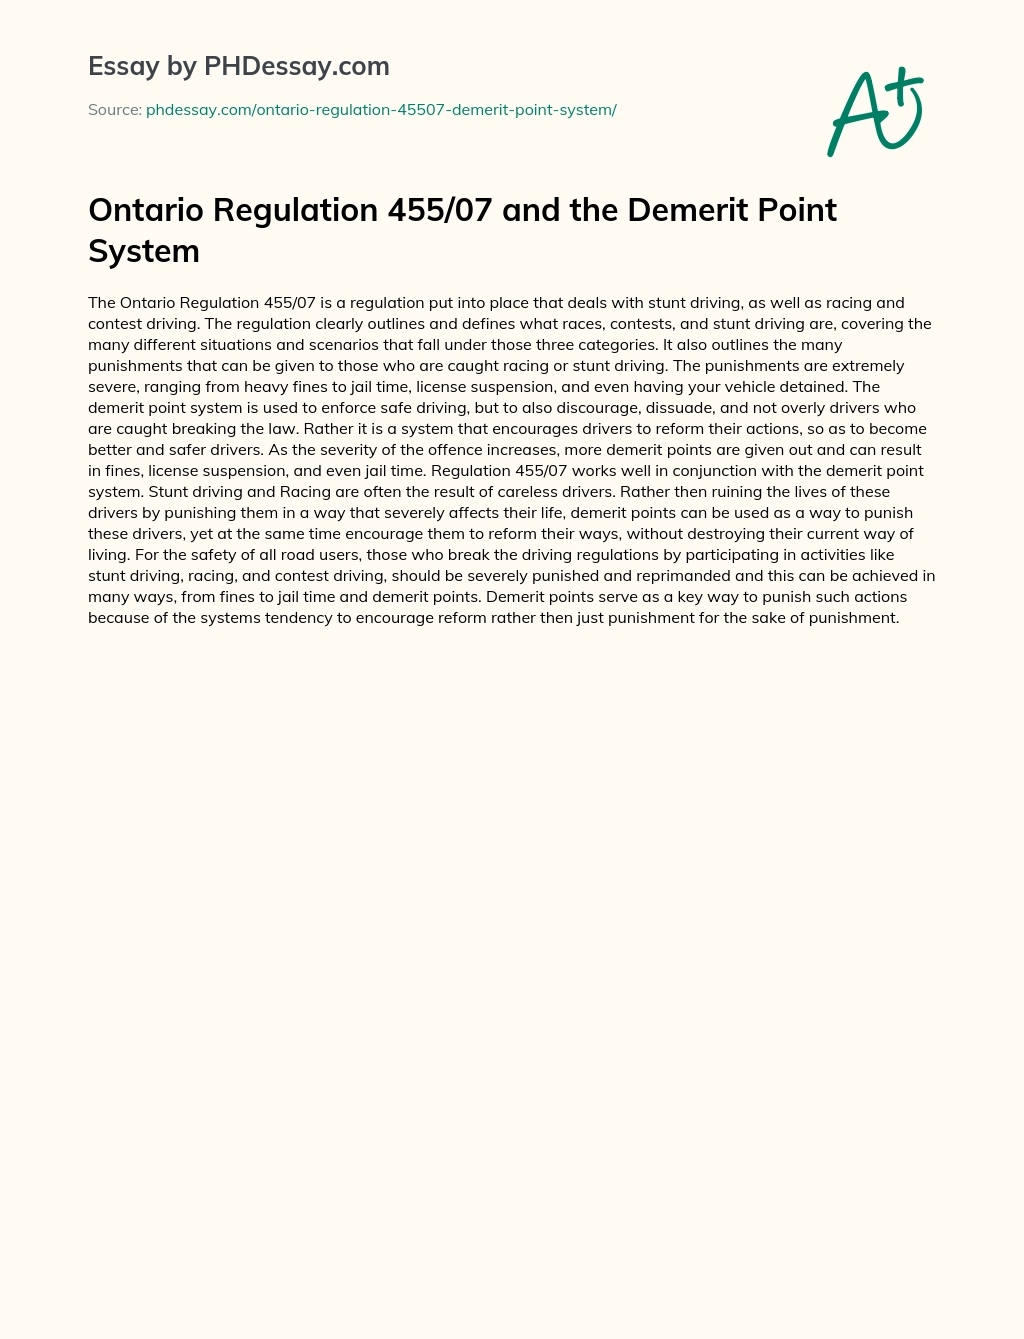 Ontario Regulation 455/07 and the Demerit Point System essay